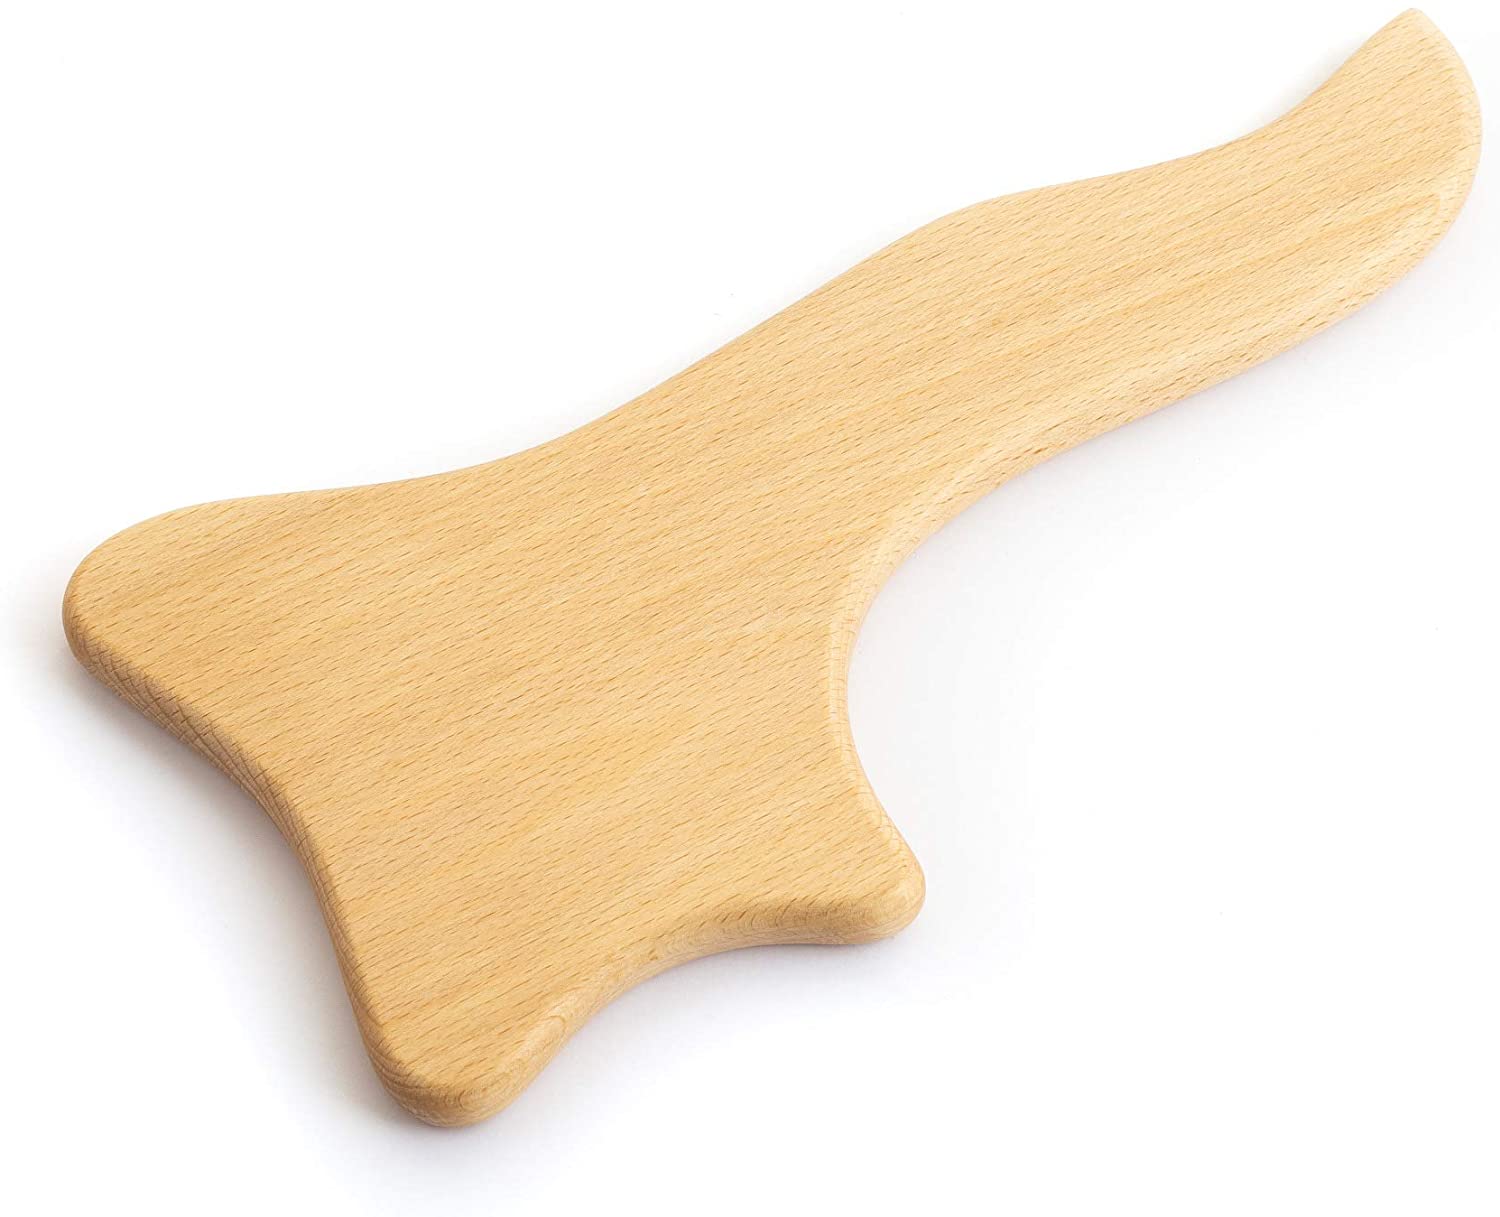 Wooden Anti Cellulite Maderotherapy Massage Tool